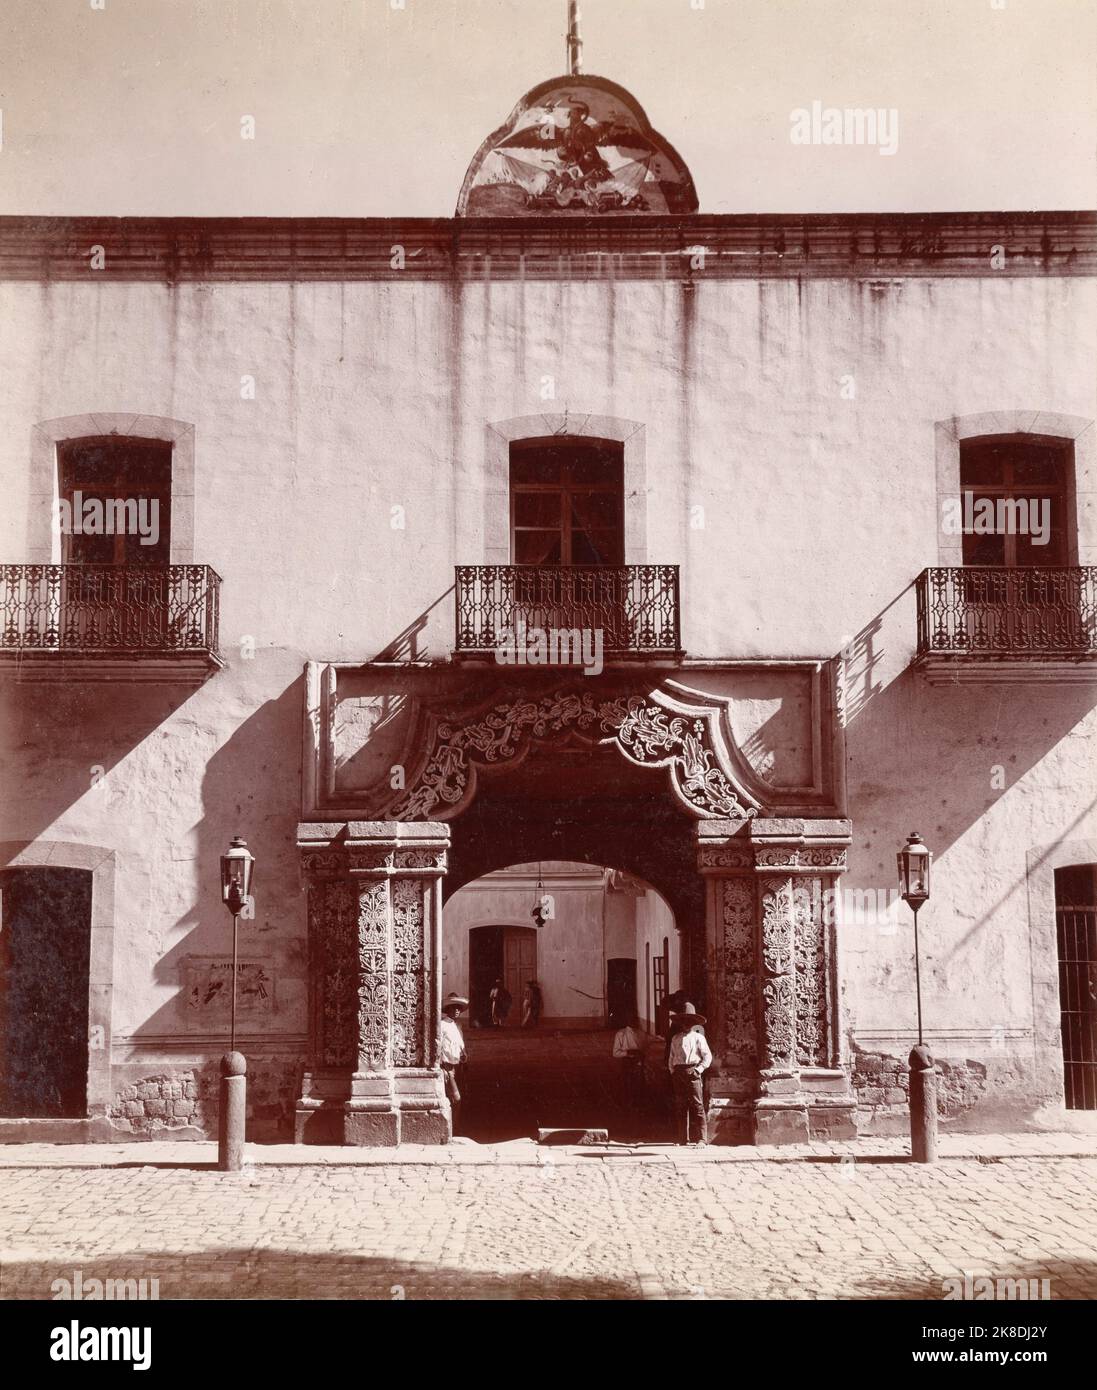 Vintage black and white photograph of the Government Palace or Palacio de Gobierno in the city of Tlaxcala, Mayo & Weed photographers,  Old Mexico 1898 Stock Photo